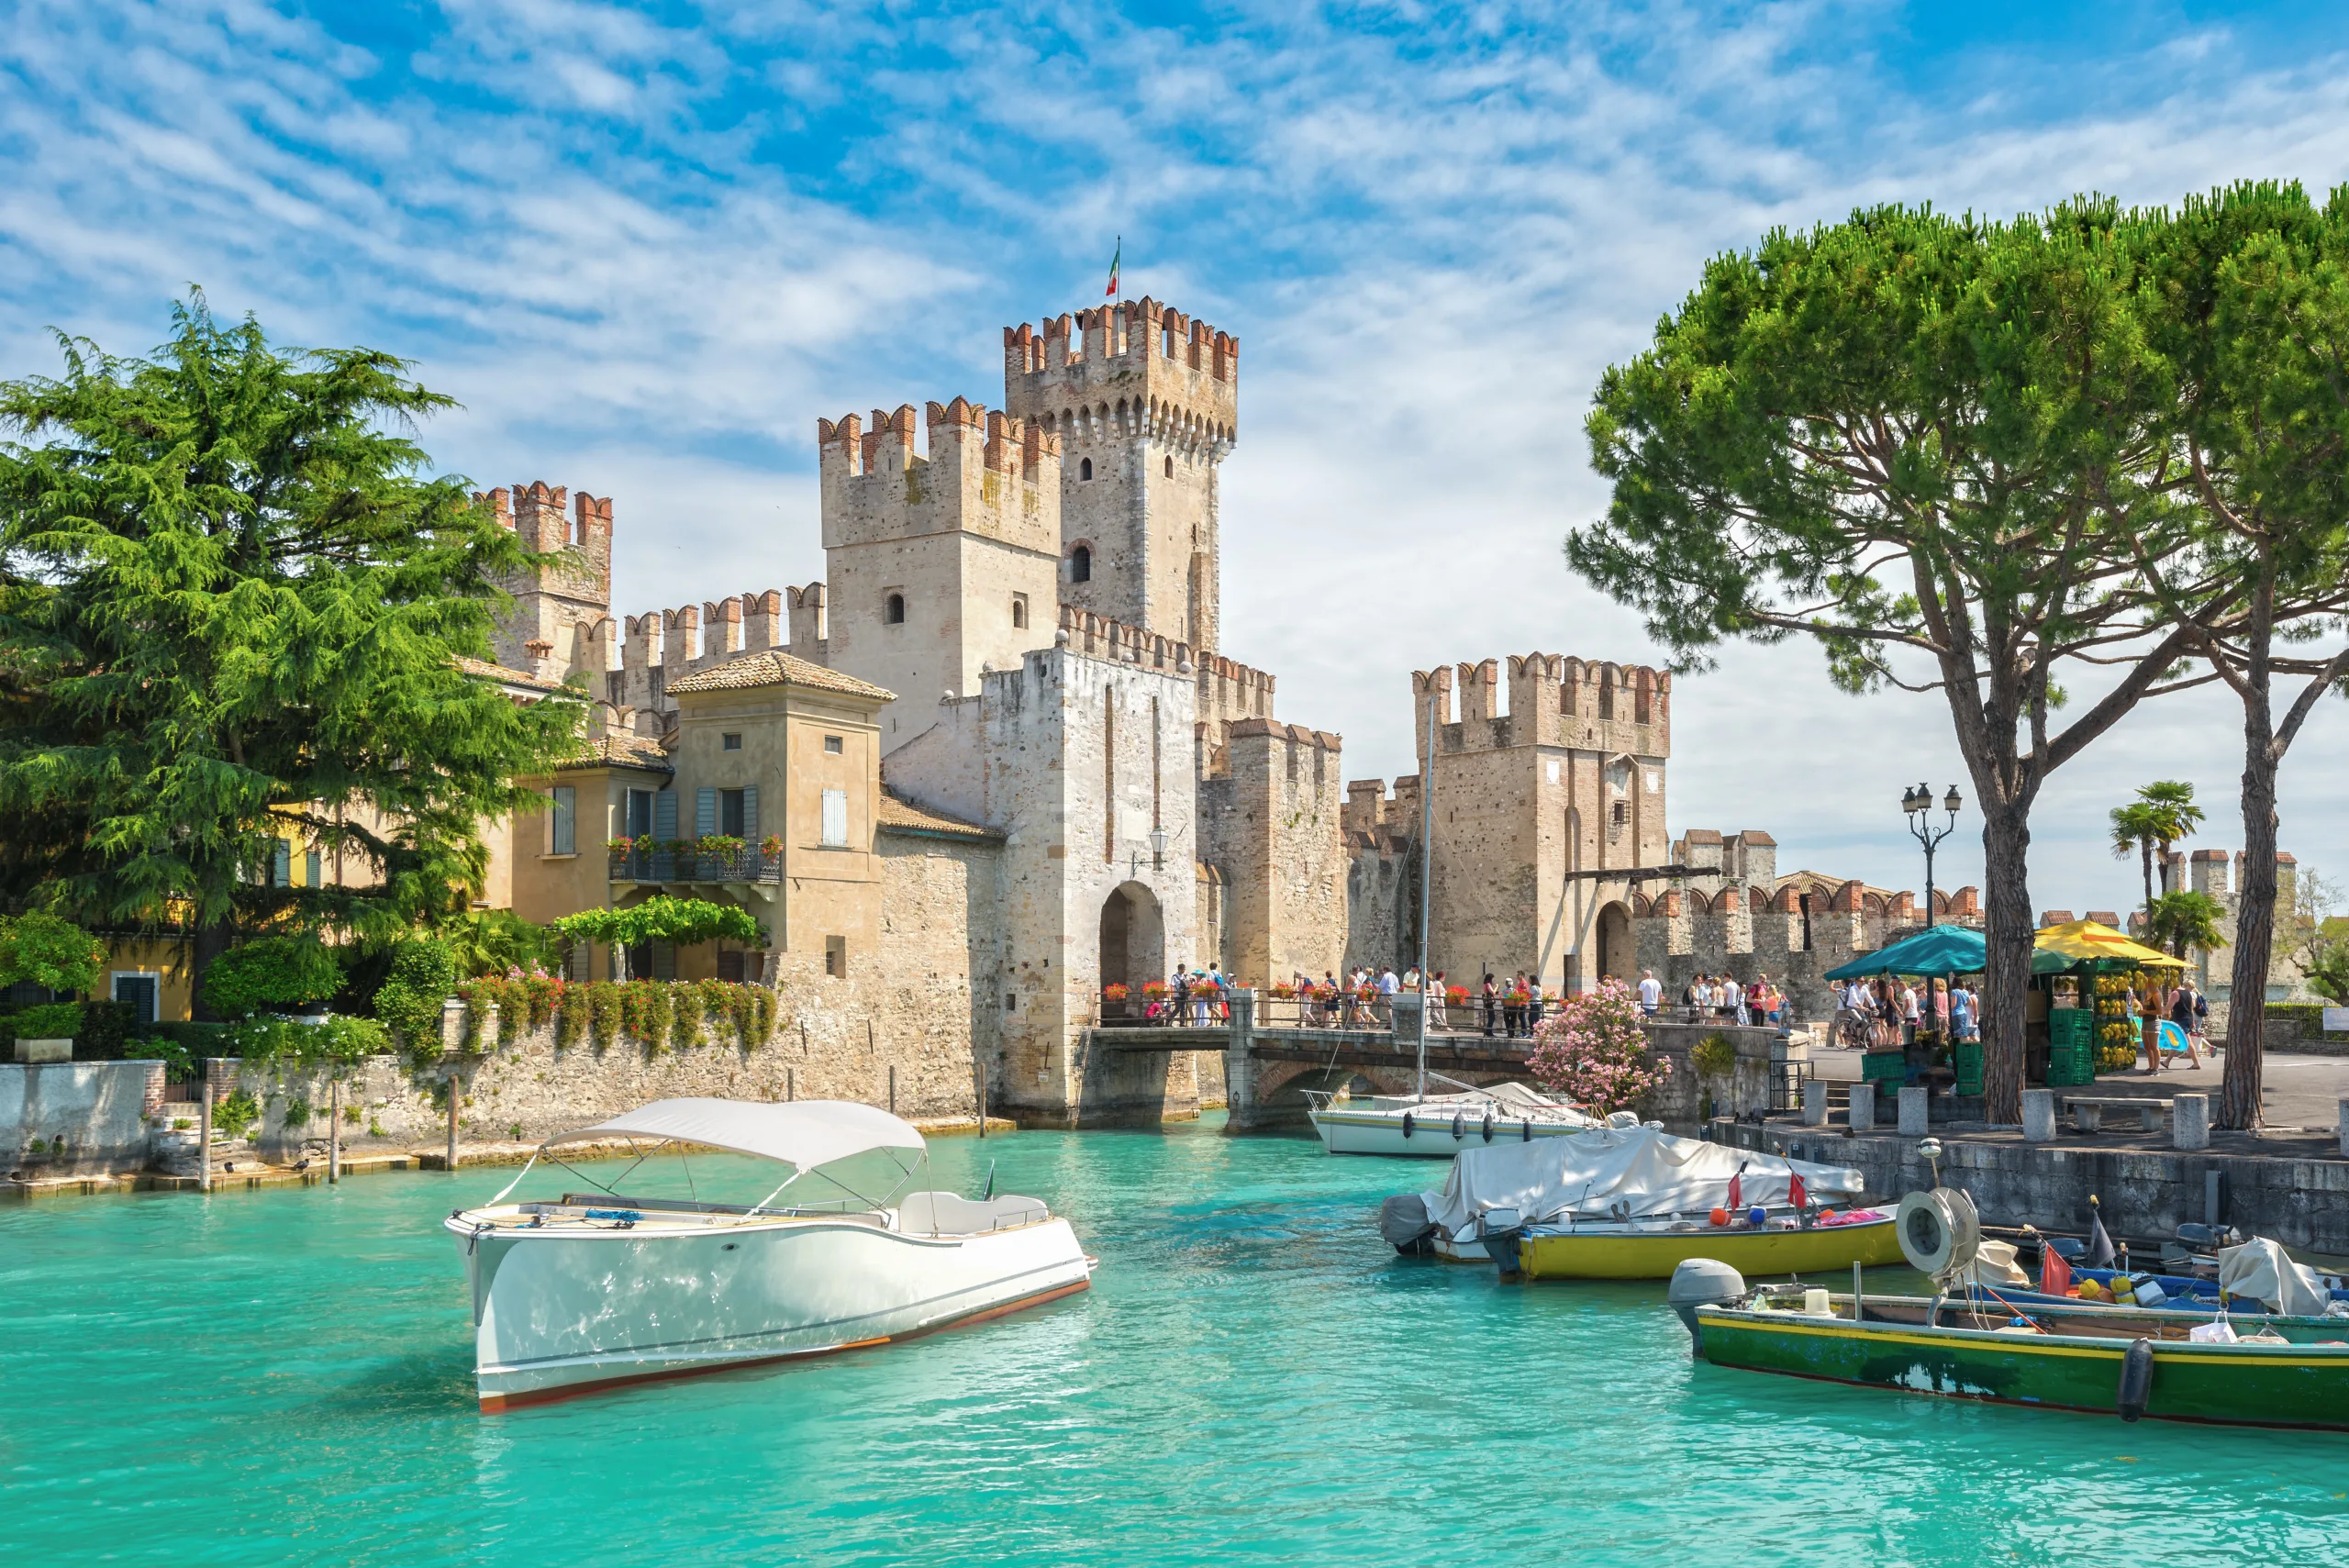 Castle in the city of Sirmione